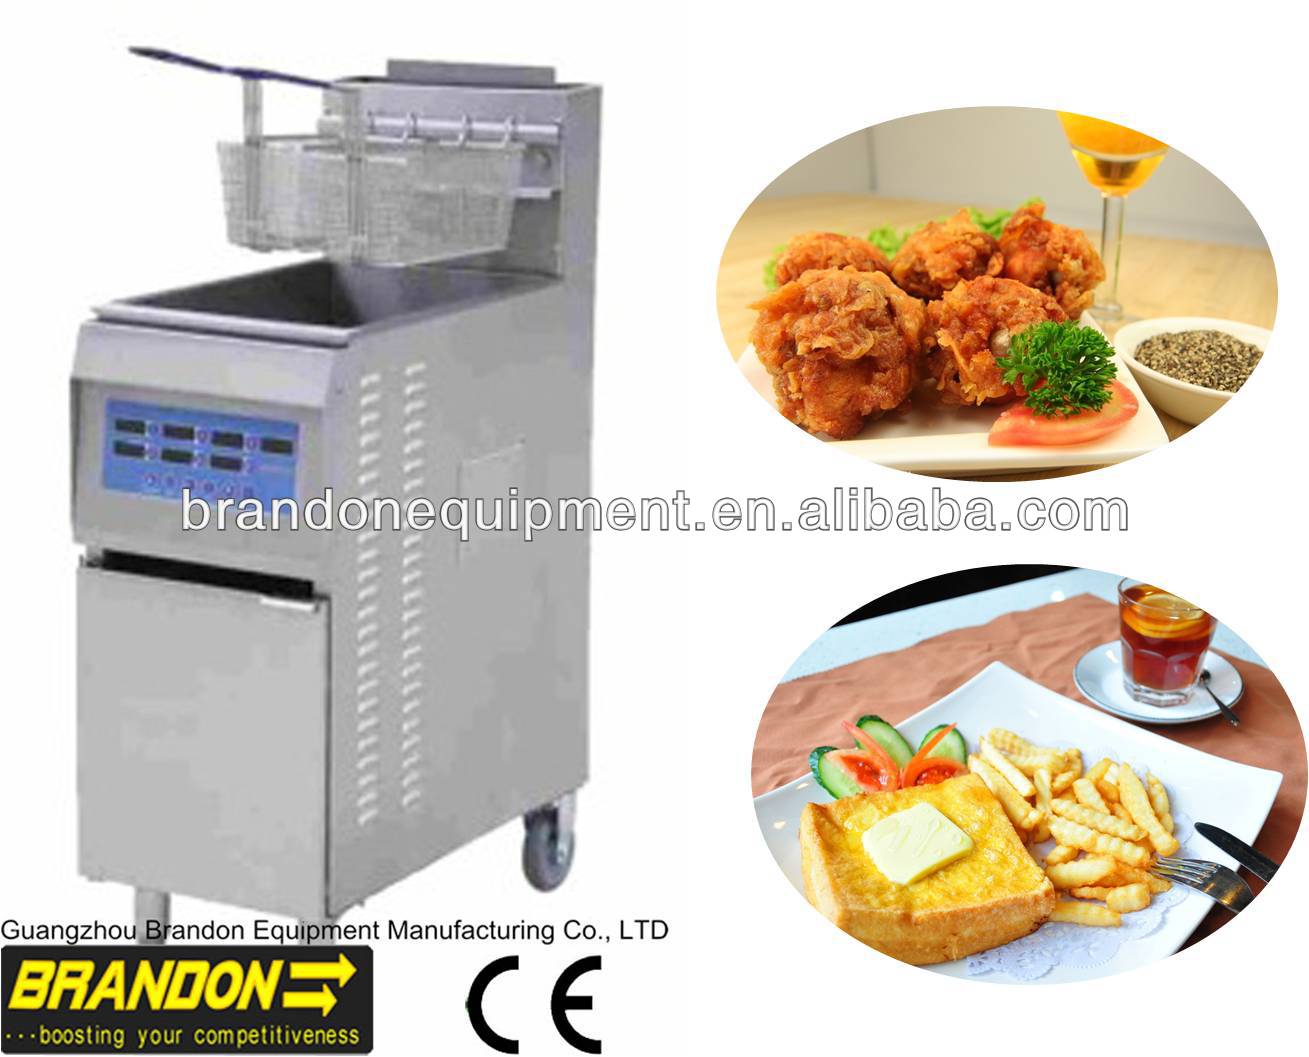 CE approved chicken deep fryer machine computer control model